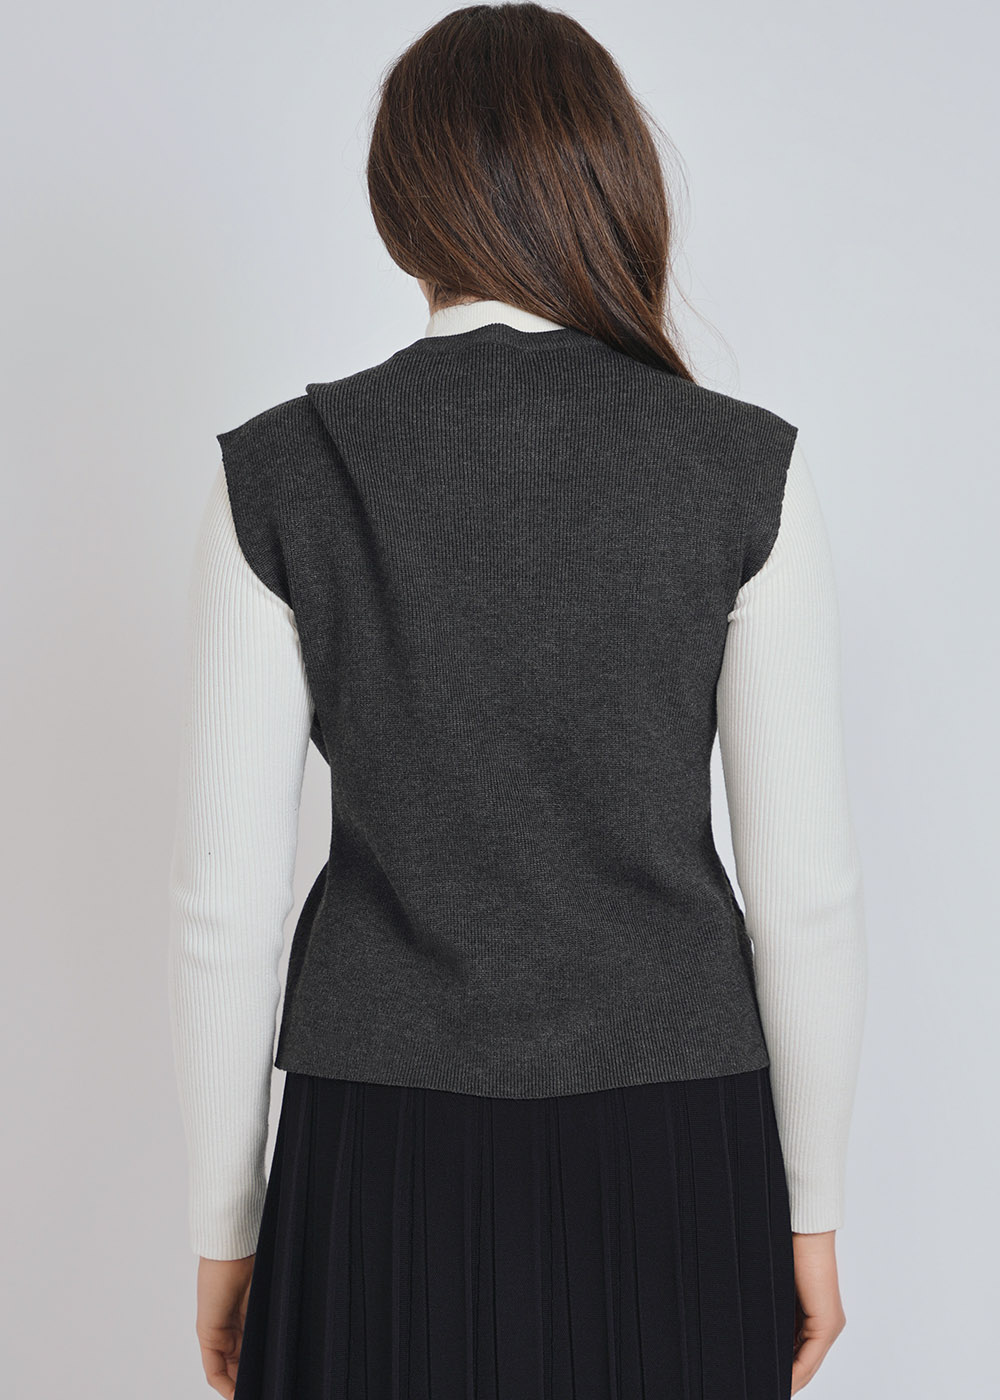 Subtle Grey Vest with Cable Knit Intricacies